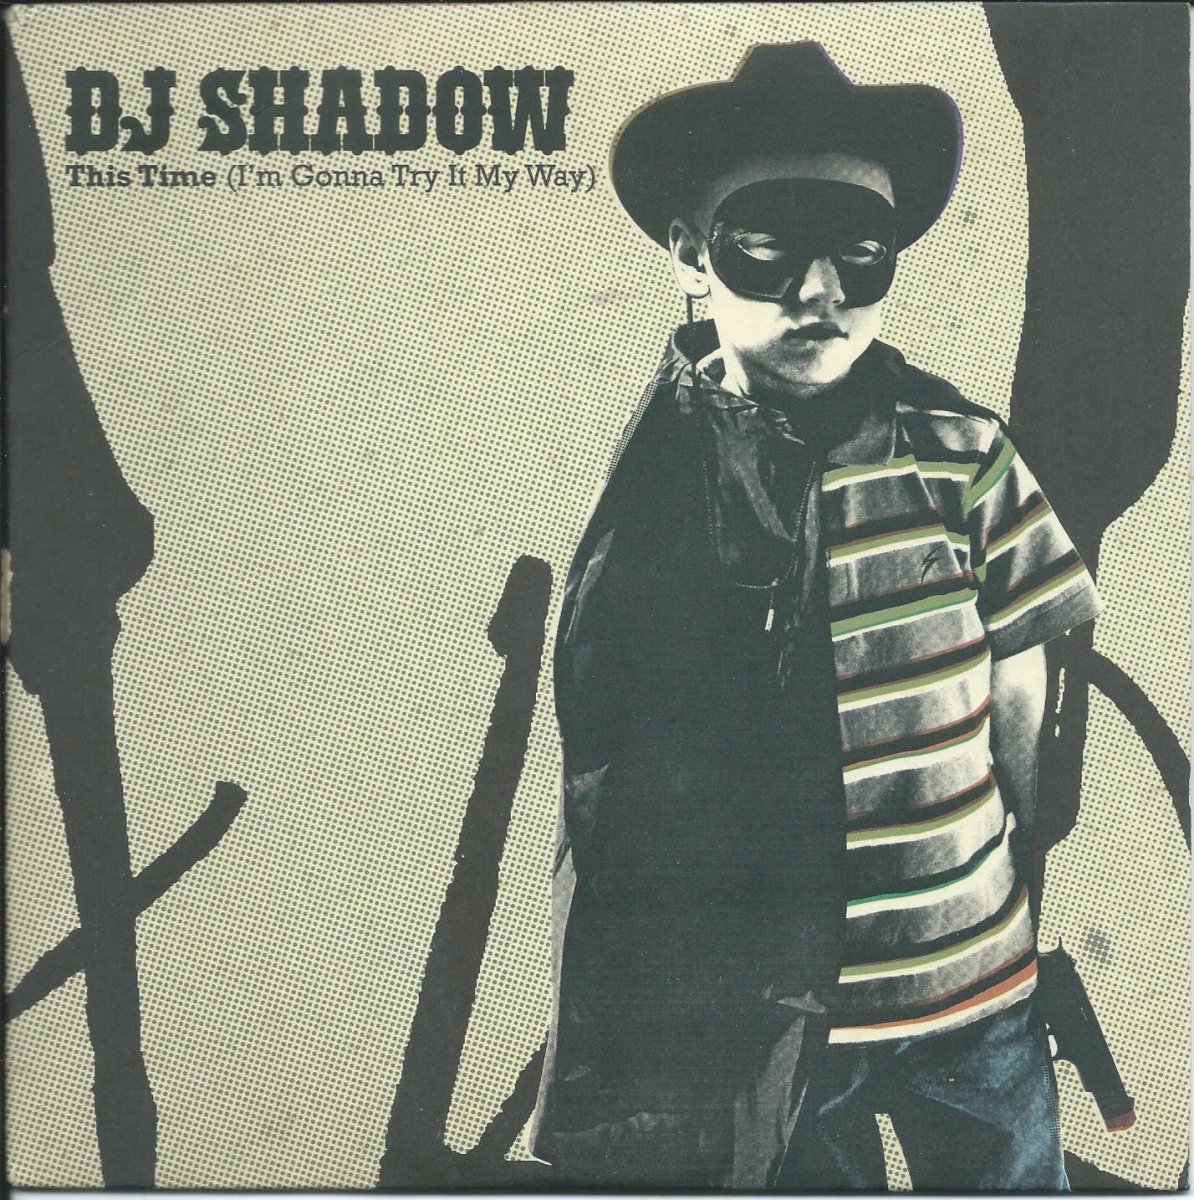 DJ SHADOW / THIS TIME (I'M GONNA TRY IT MY WAY) / THIS TIME (I'M GONNA DUB IT MY WAY) (7